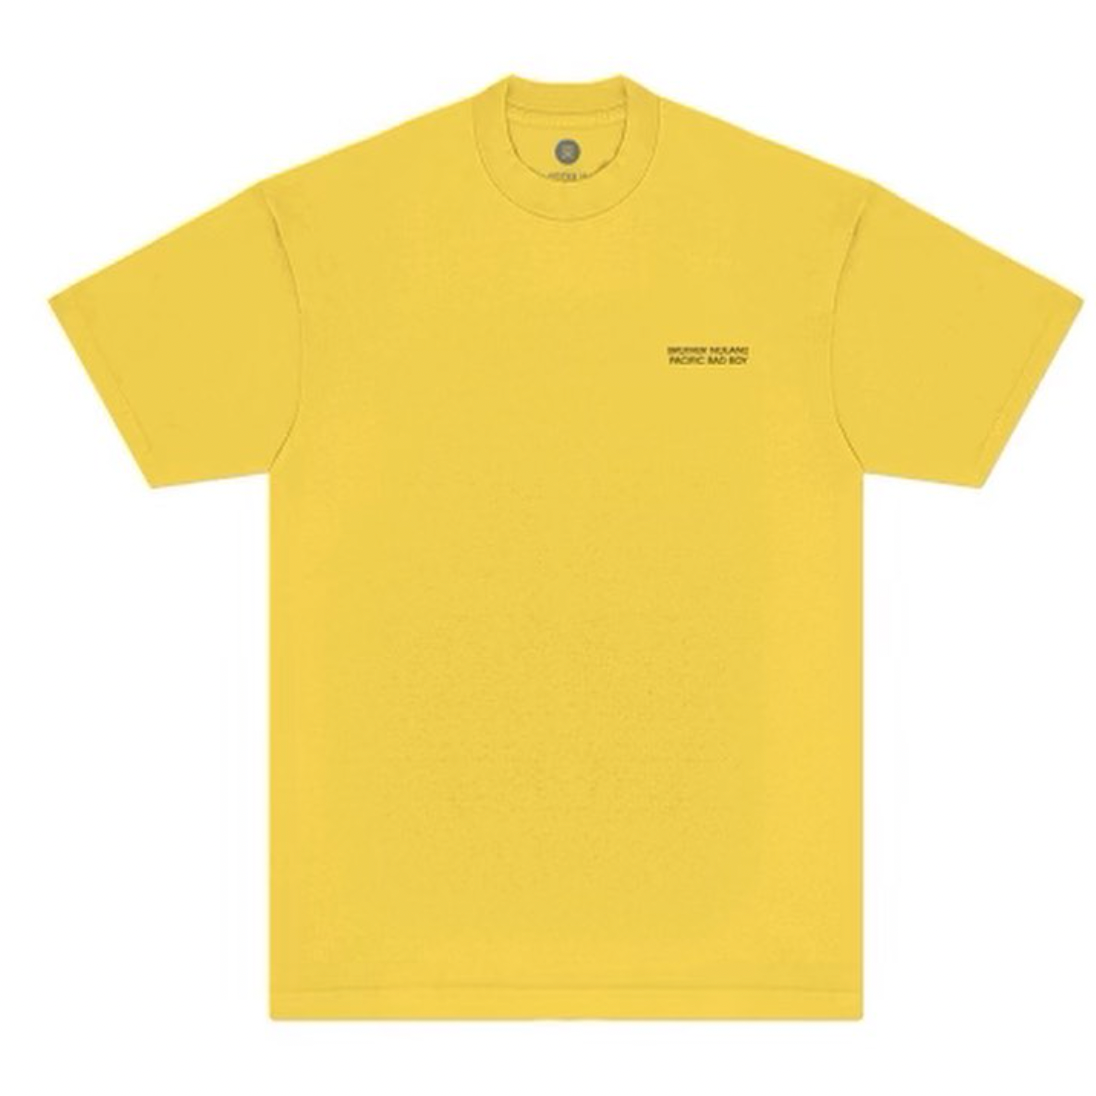 Brother Noland "Pacific Bad Boy" T-shirt (Yellow)